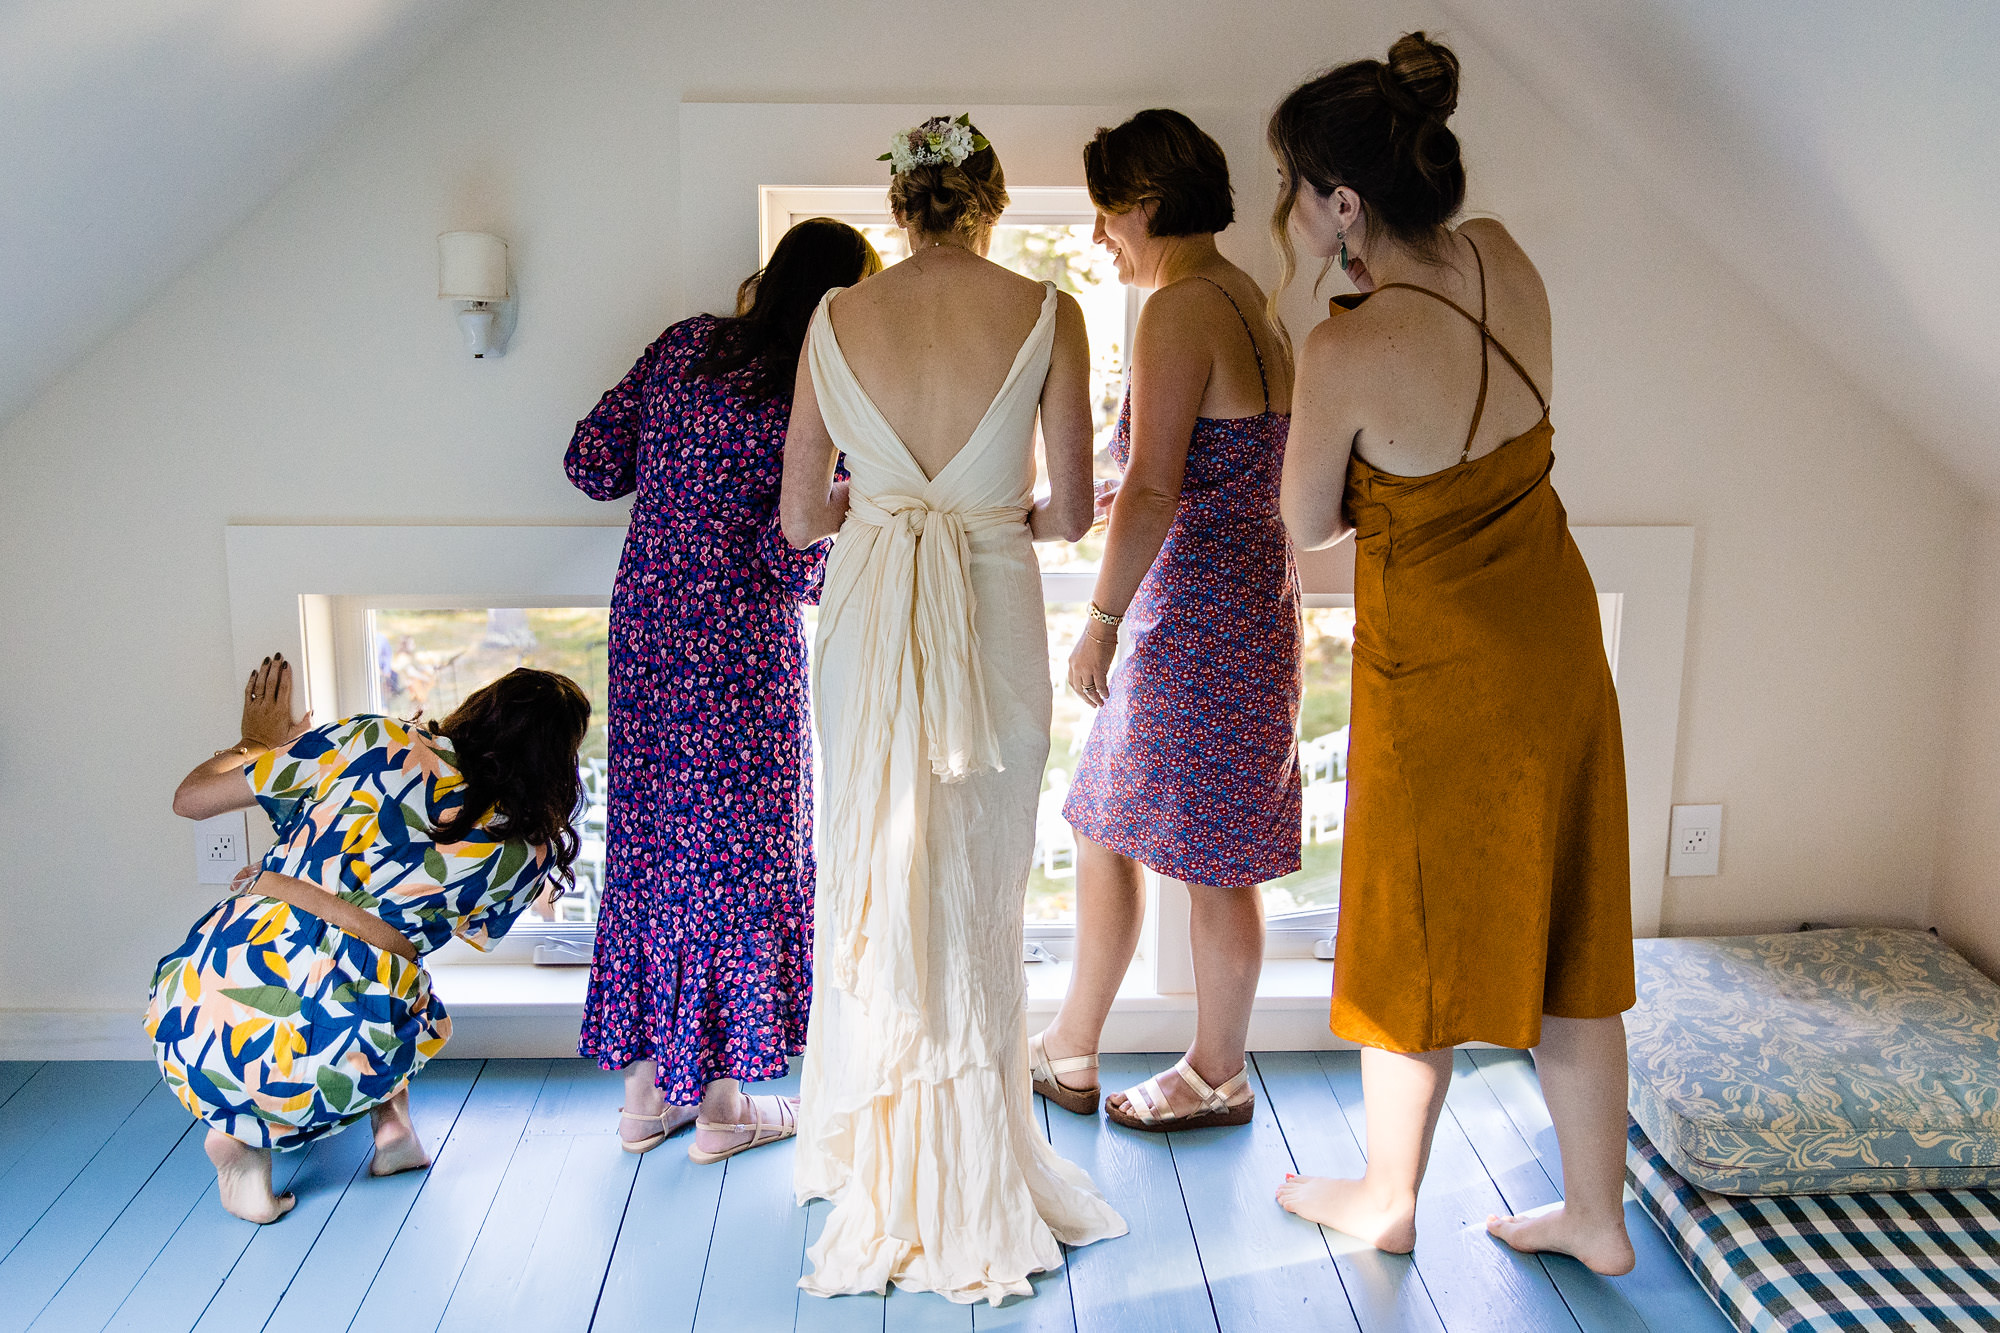 The bride and groom and their friends prepare for their Blue Hill Maine wedding day